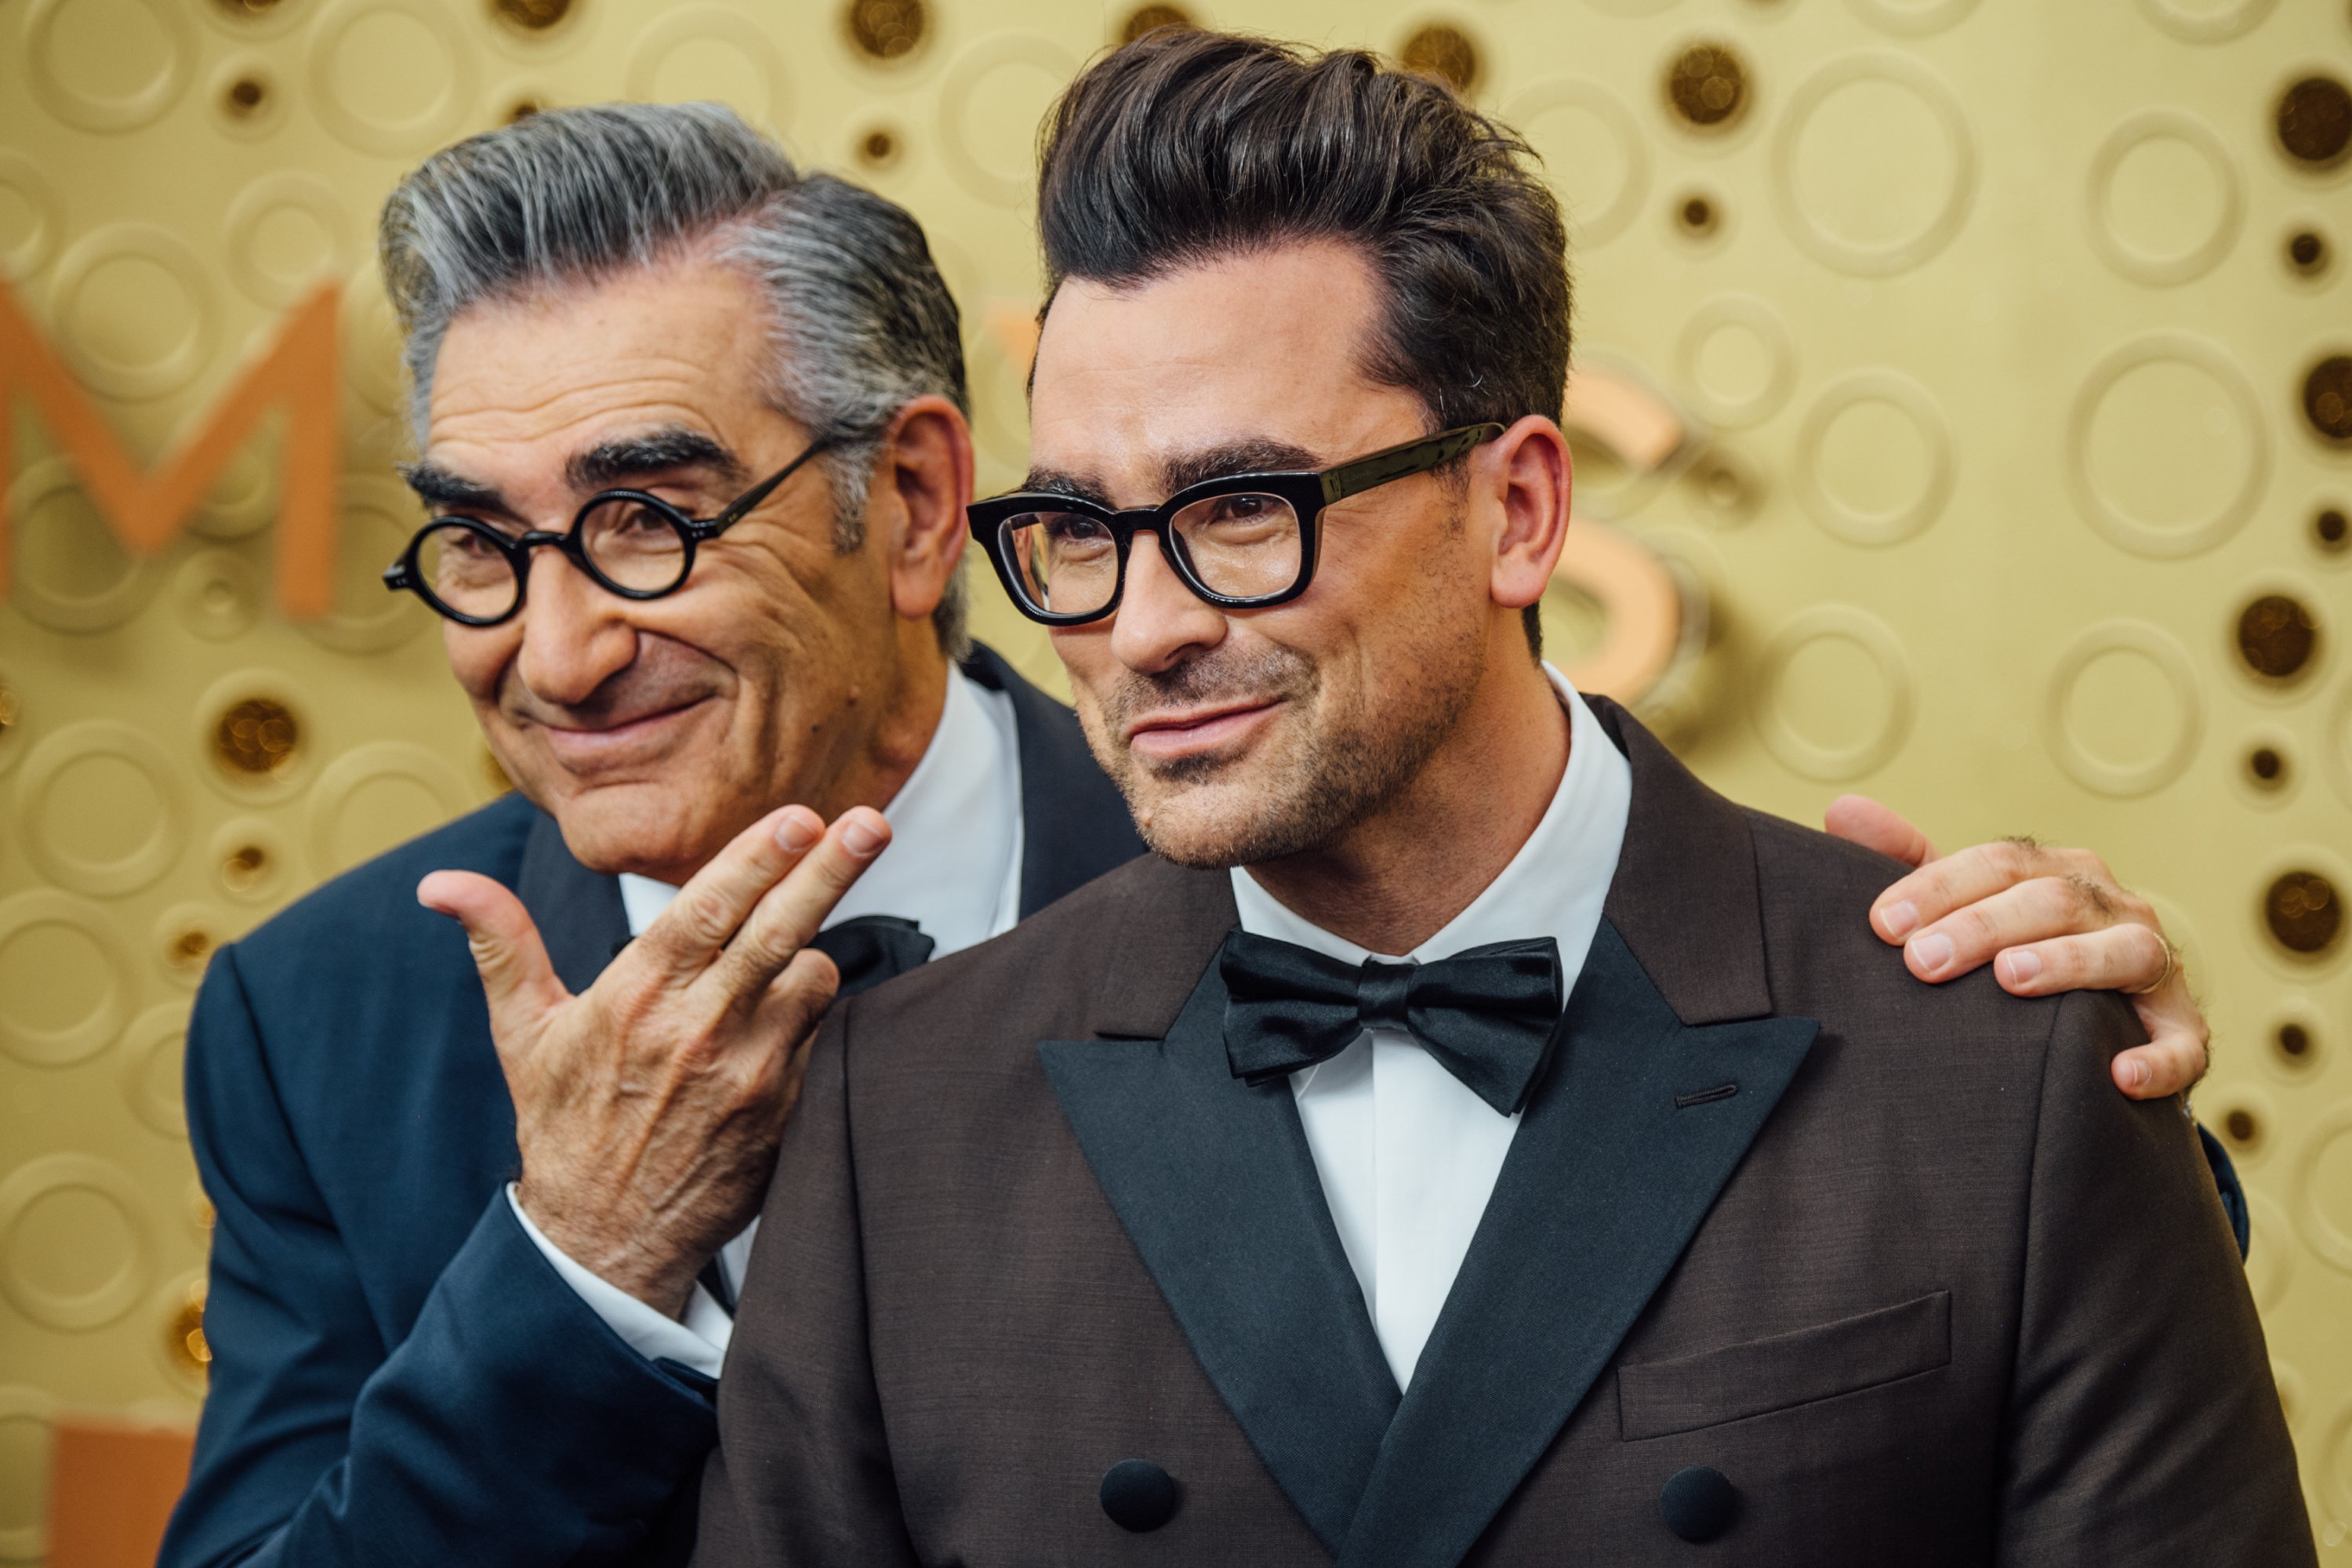 Eugene and Dan Levy, "Schitt's Creek" creators, at the 71st Emmy Awards at Microsoft Theater, 2019, Los Angeles, California. | Photo: Getty Images